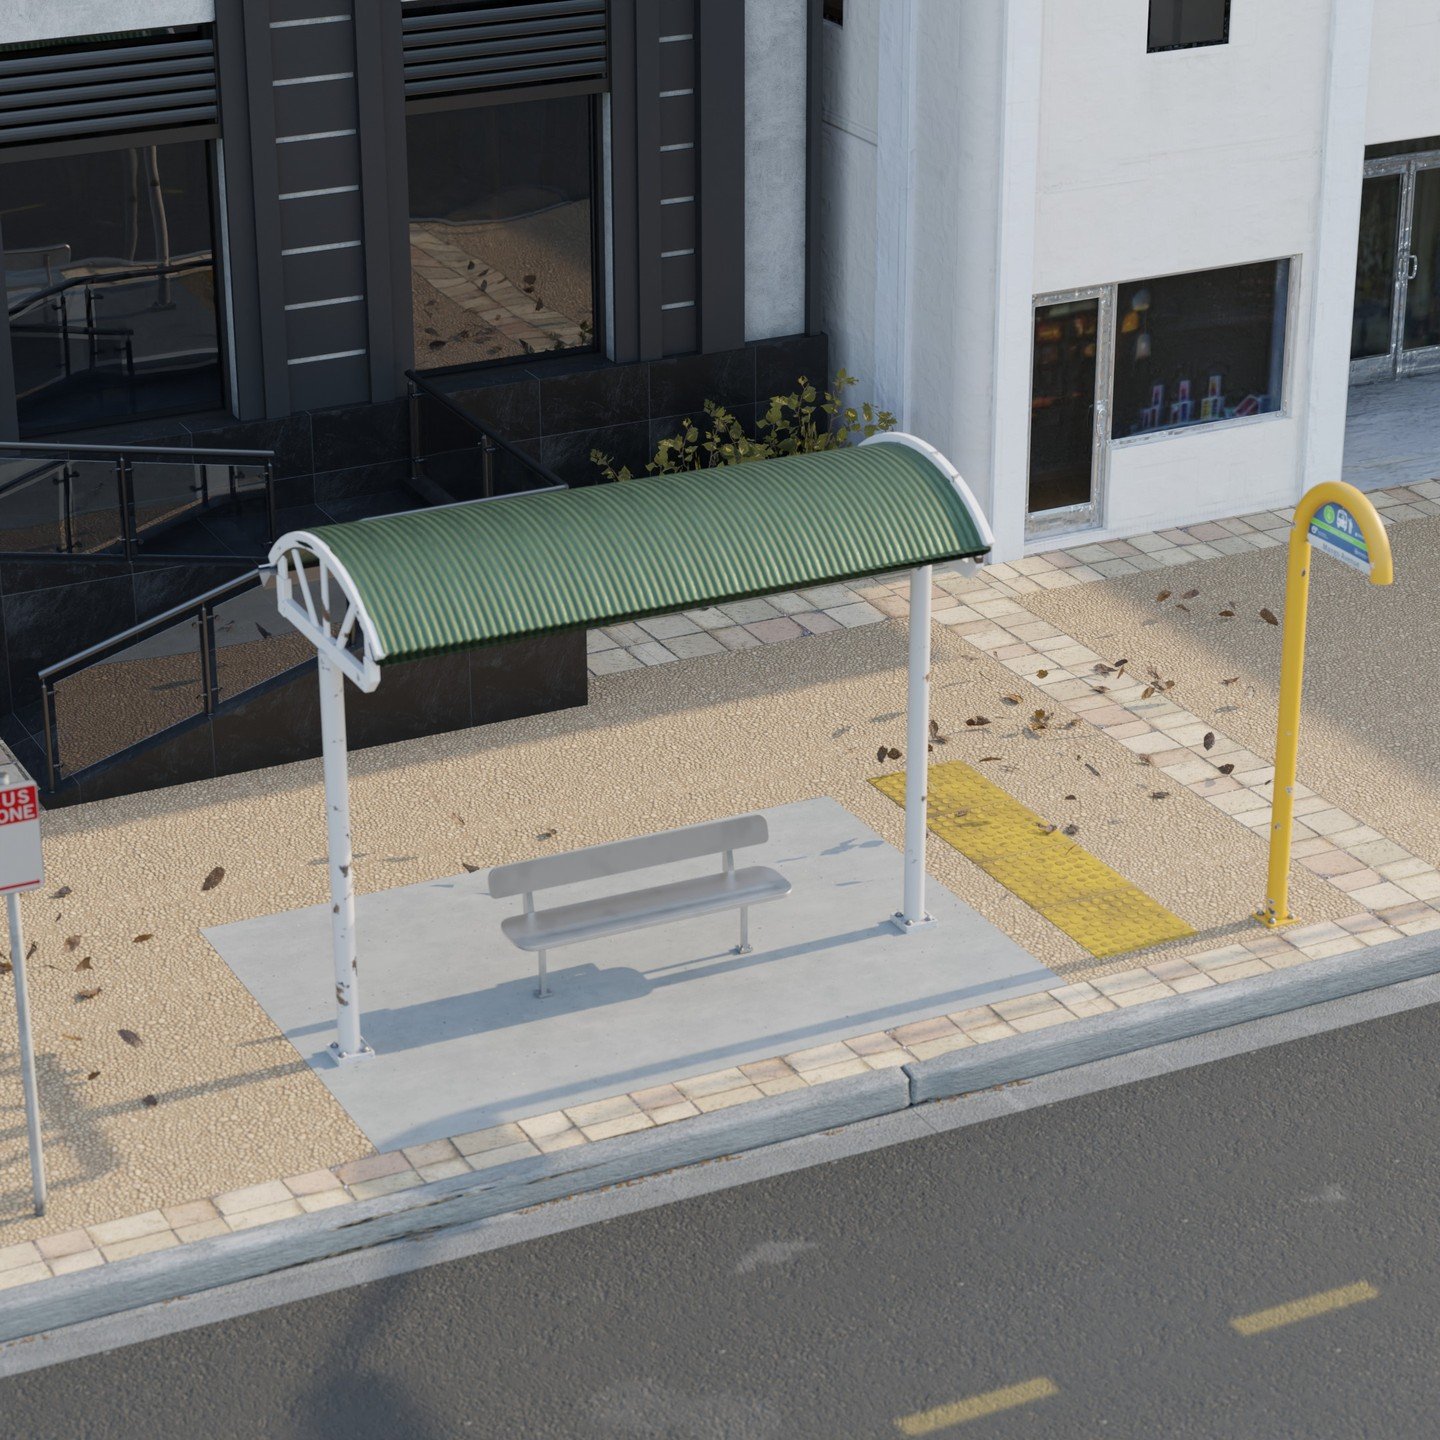 Townsville bus stop, day vs night. A scene I created for a video I am excited to share in the upcoming weeks.

#townsville #townsvilleshines #3dscene #3d #3dart #townsvillebusiness